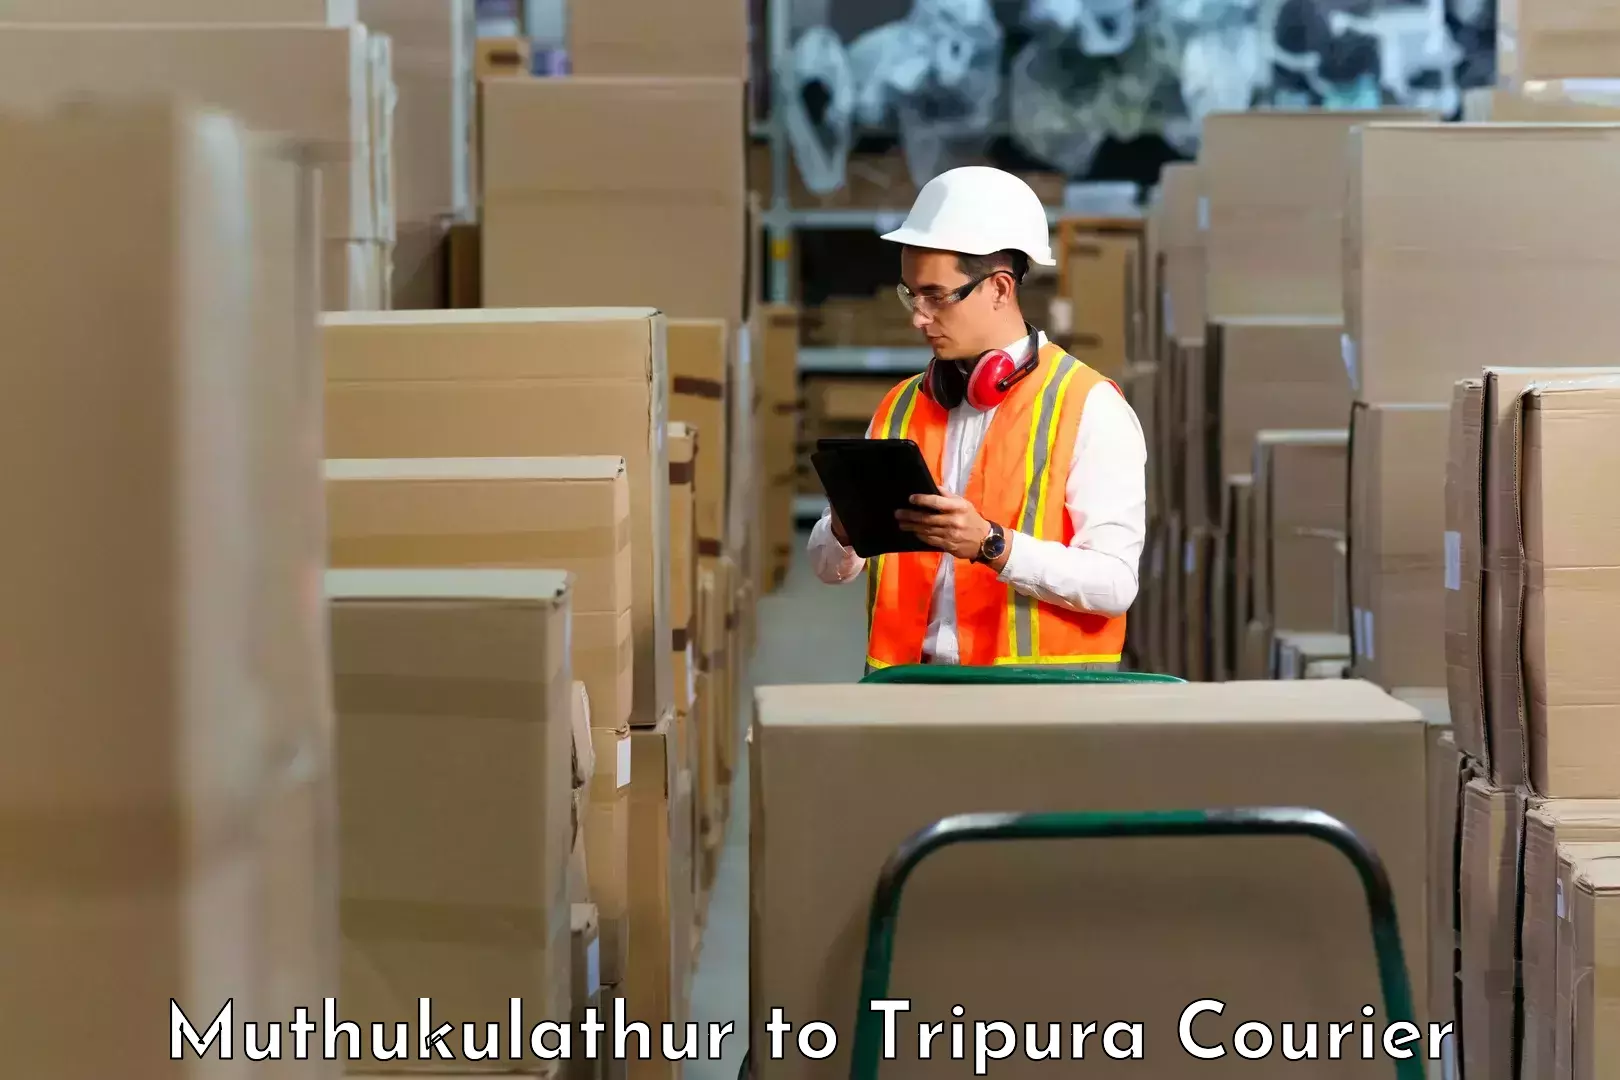 High-priority parcel service Muthukulathur to Tripura